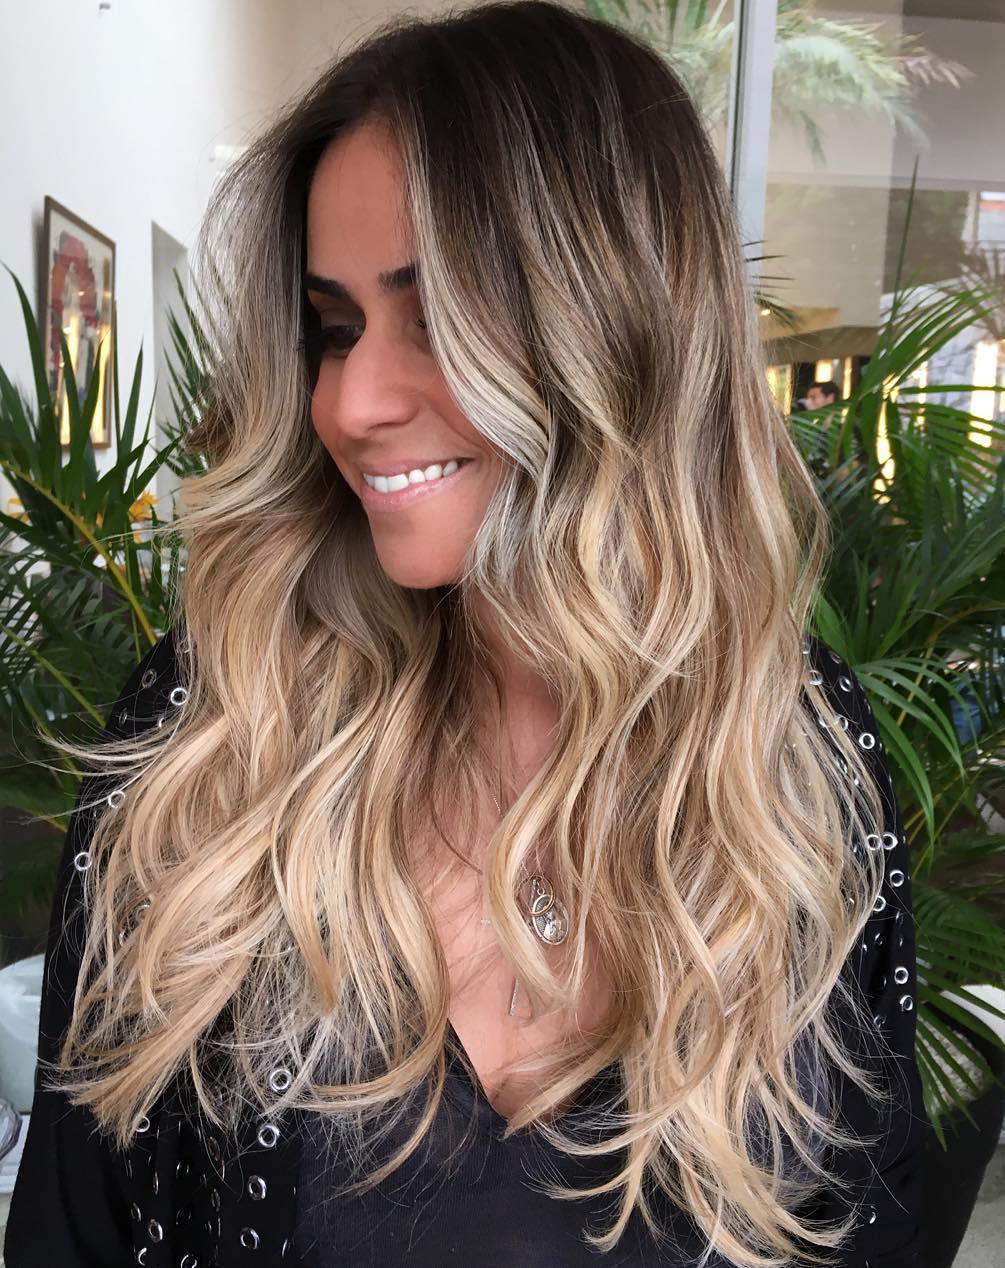 dlho Beach Waves For Ombre Hair